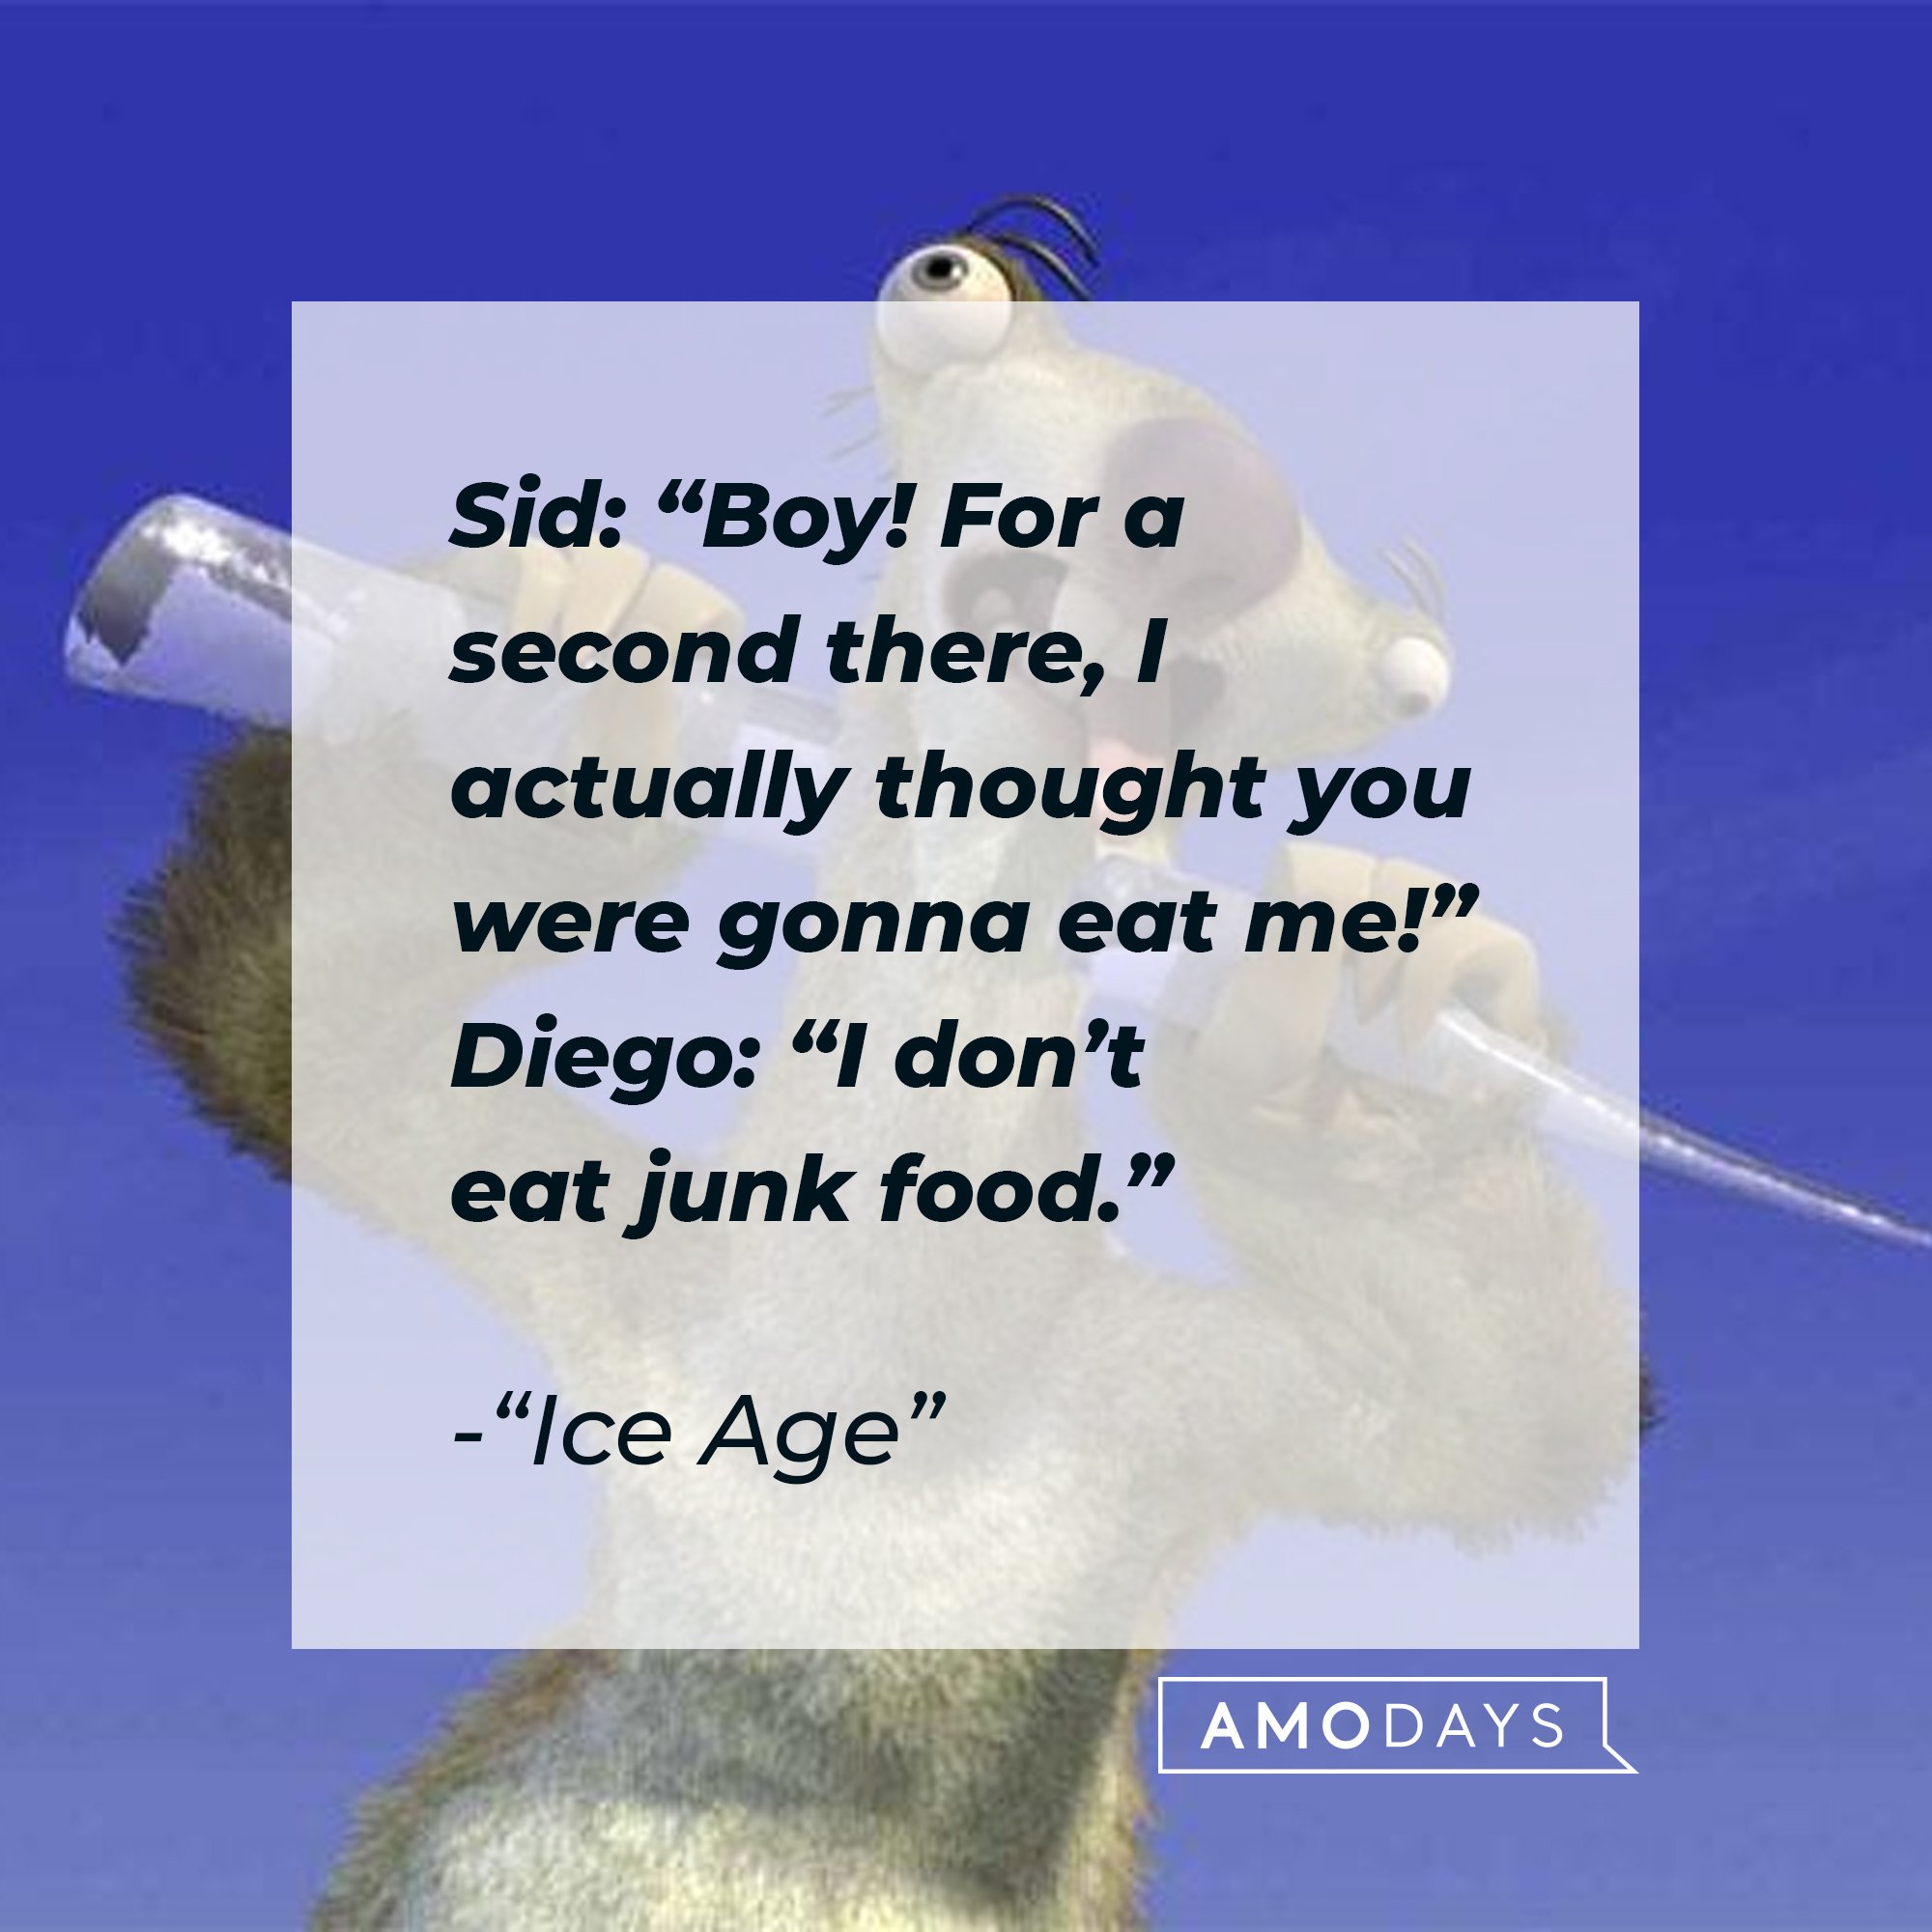 Ic Age's dialogue: Sid: “Boy! For a second there, I actually thought you were gonna eat me!”  Diego: “I don’t eat junk food.” | Image: AmoDays